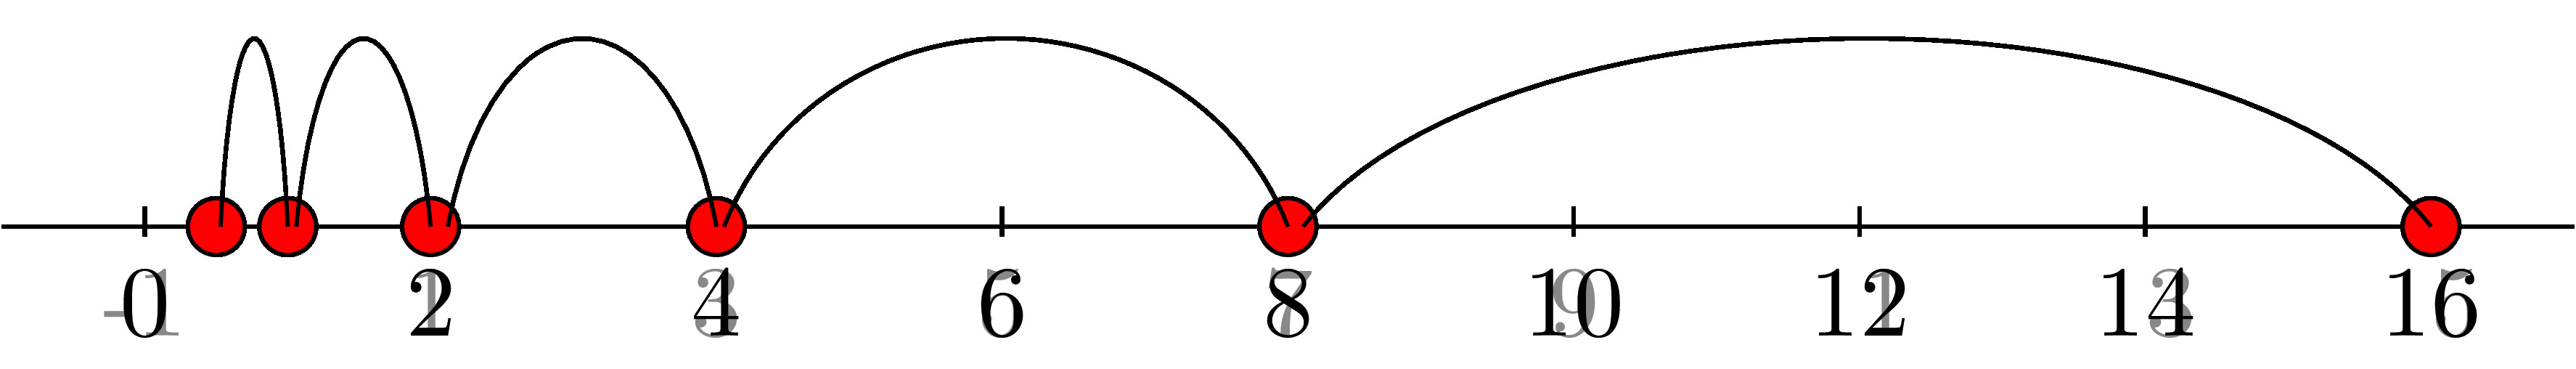 Illustration of the contraction principle